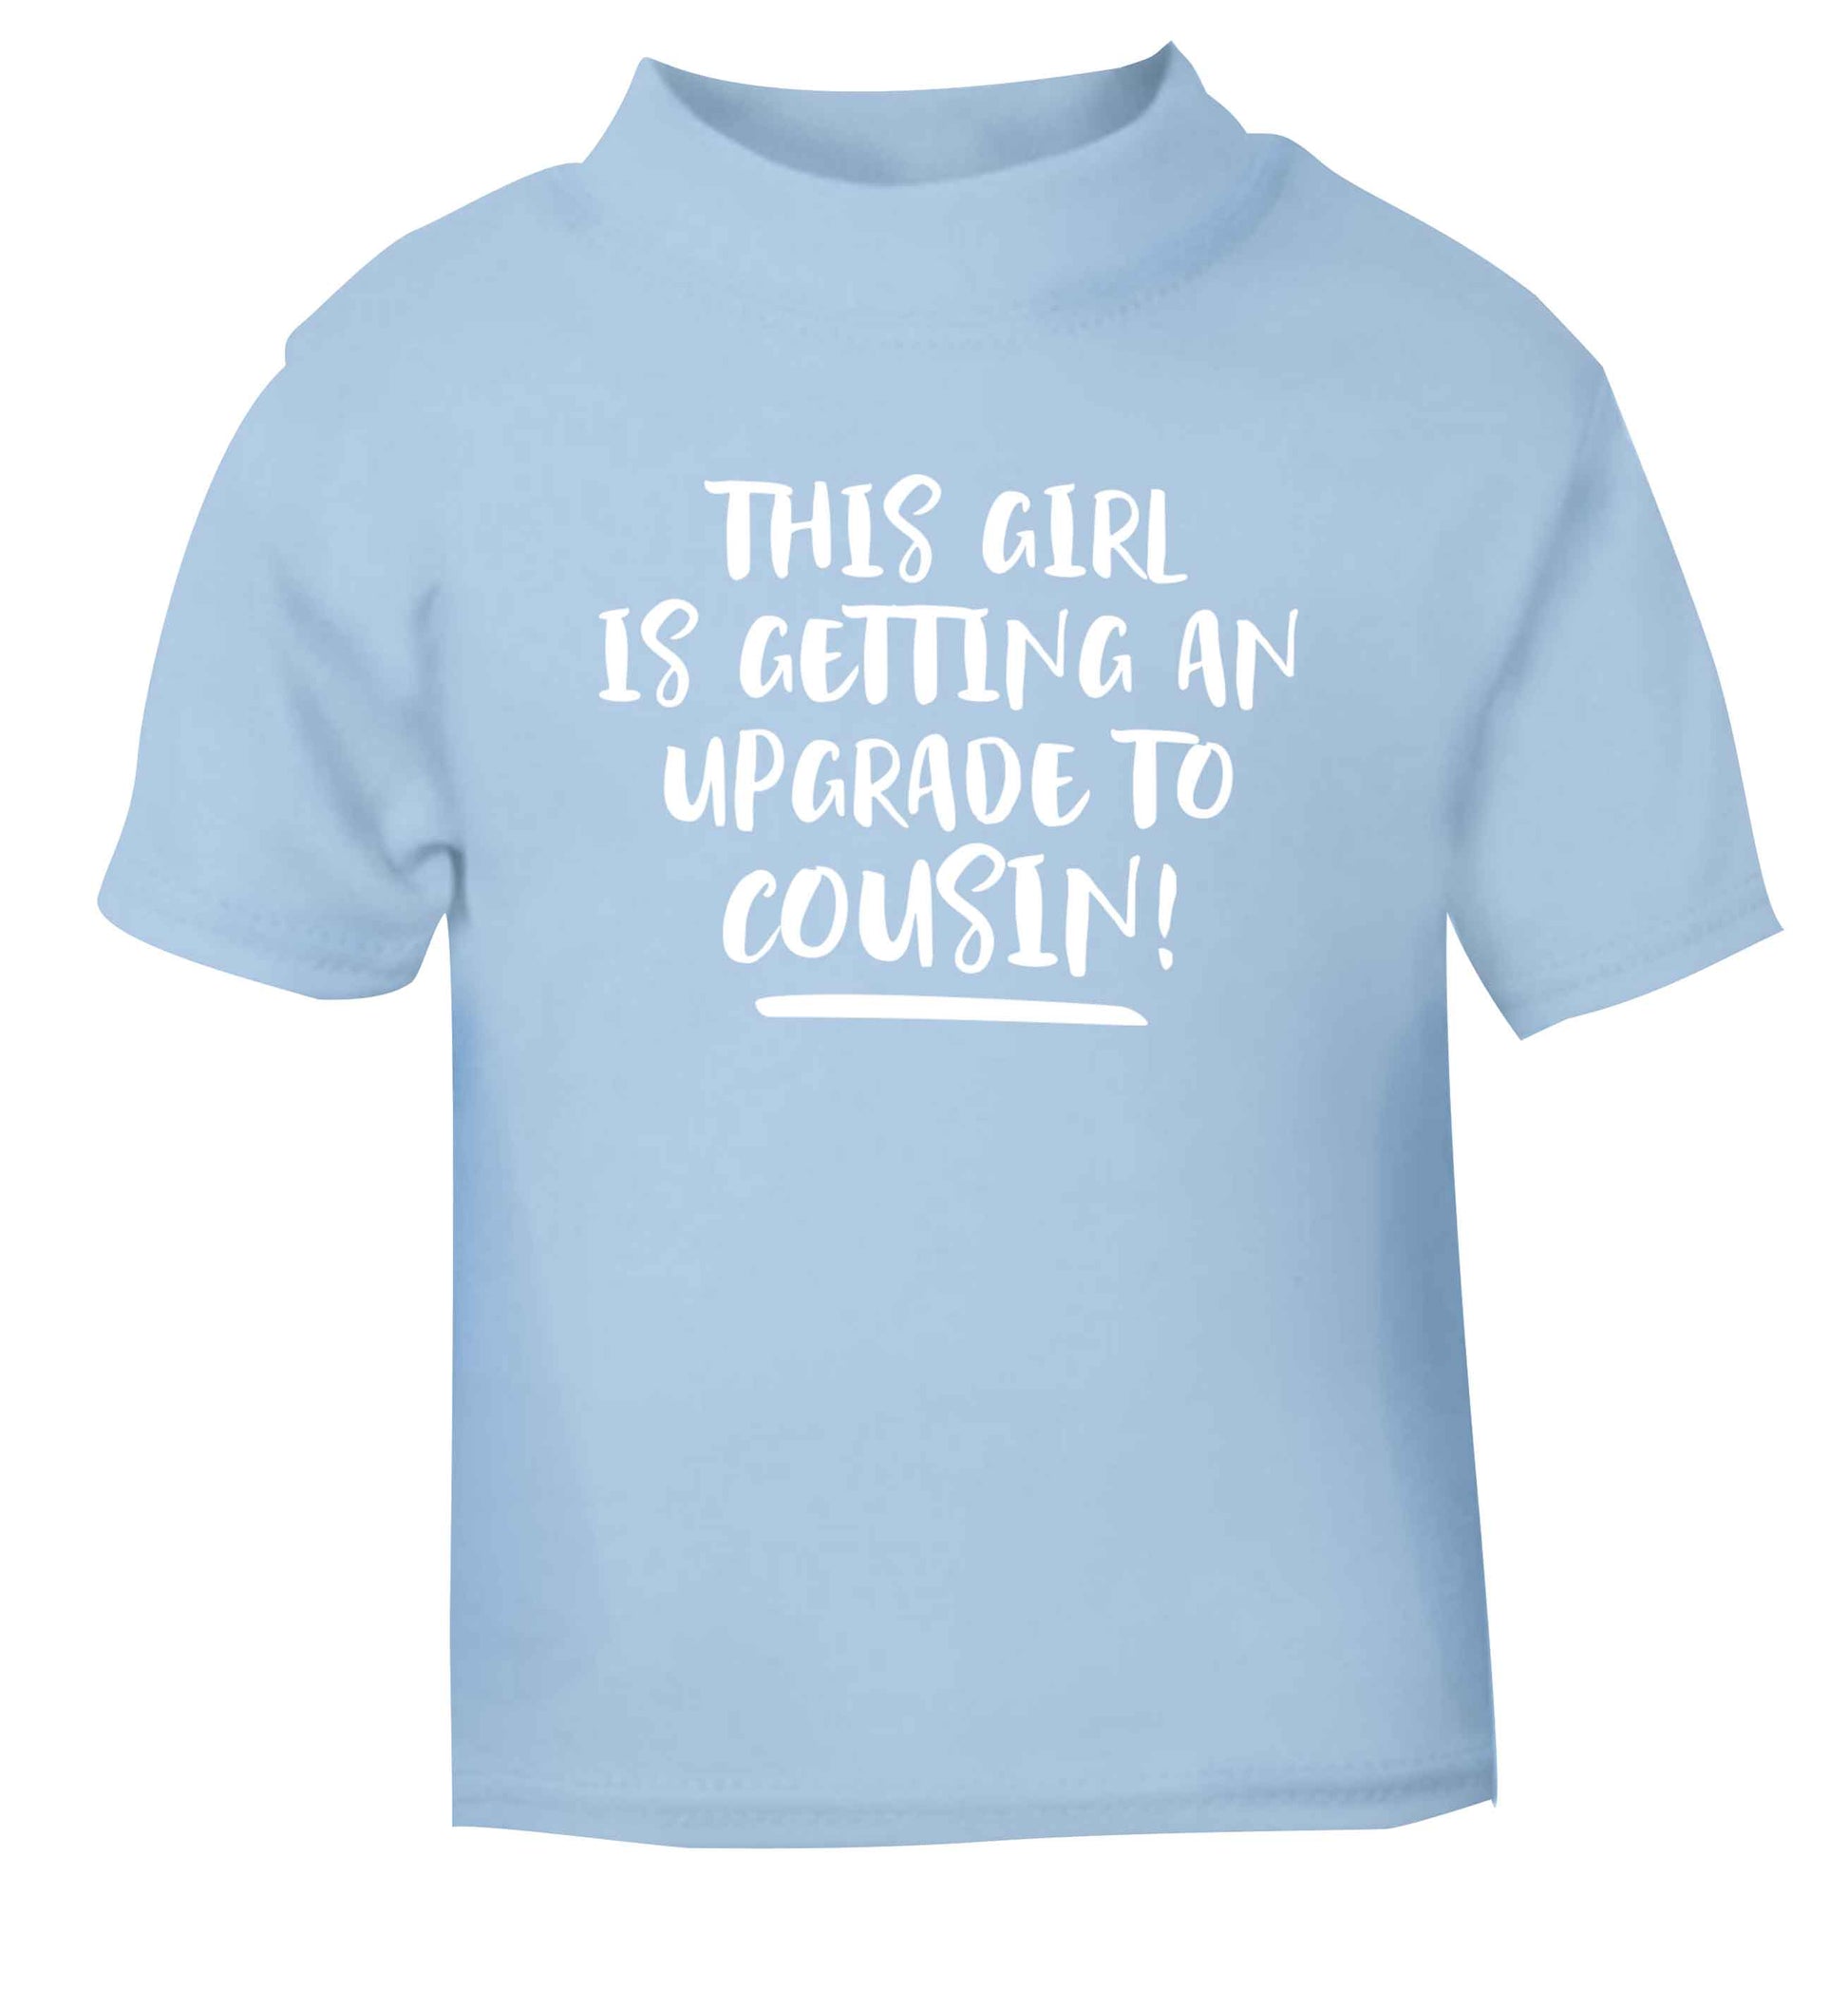 This girl is getting an upgrade to cousin! light blue Baby Toddler Tshirt 2 Years